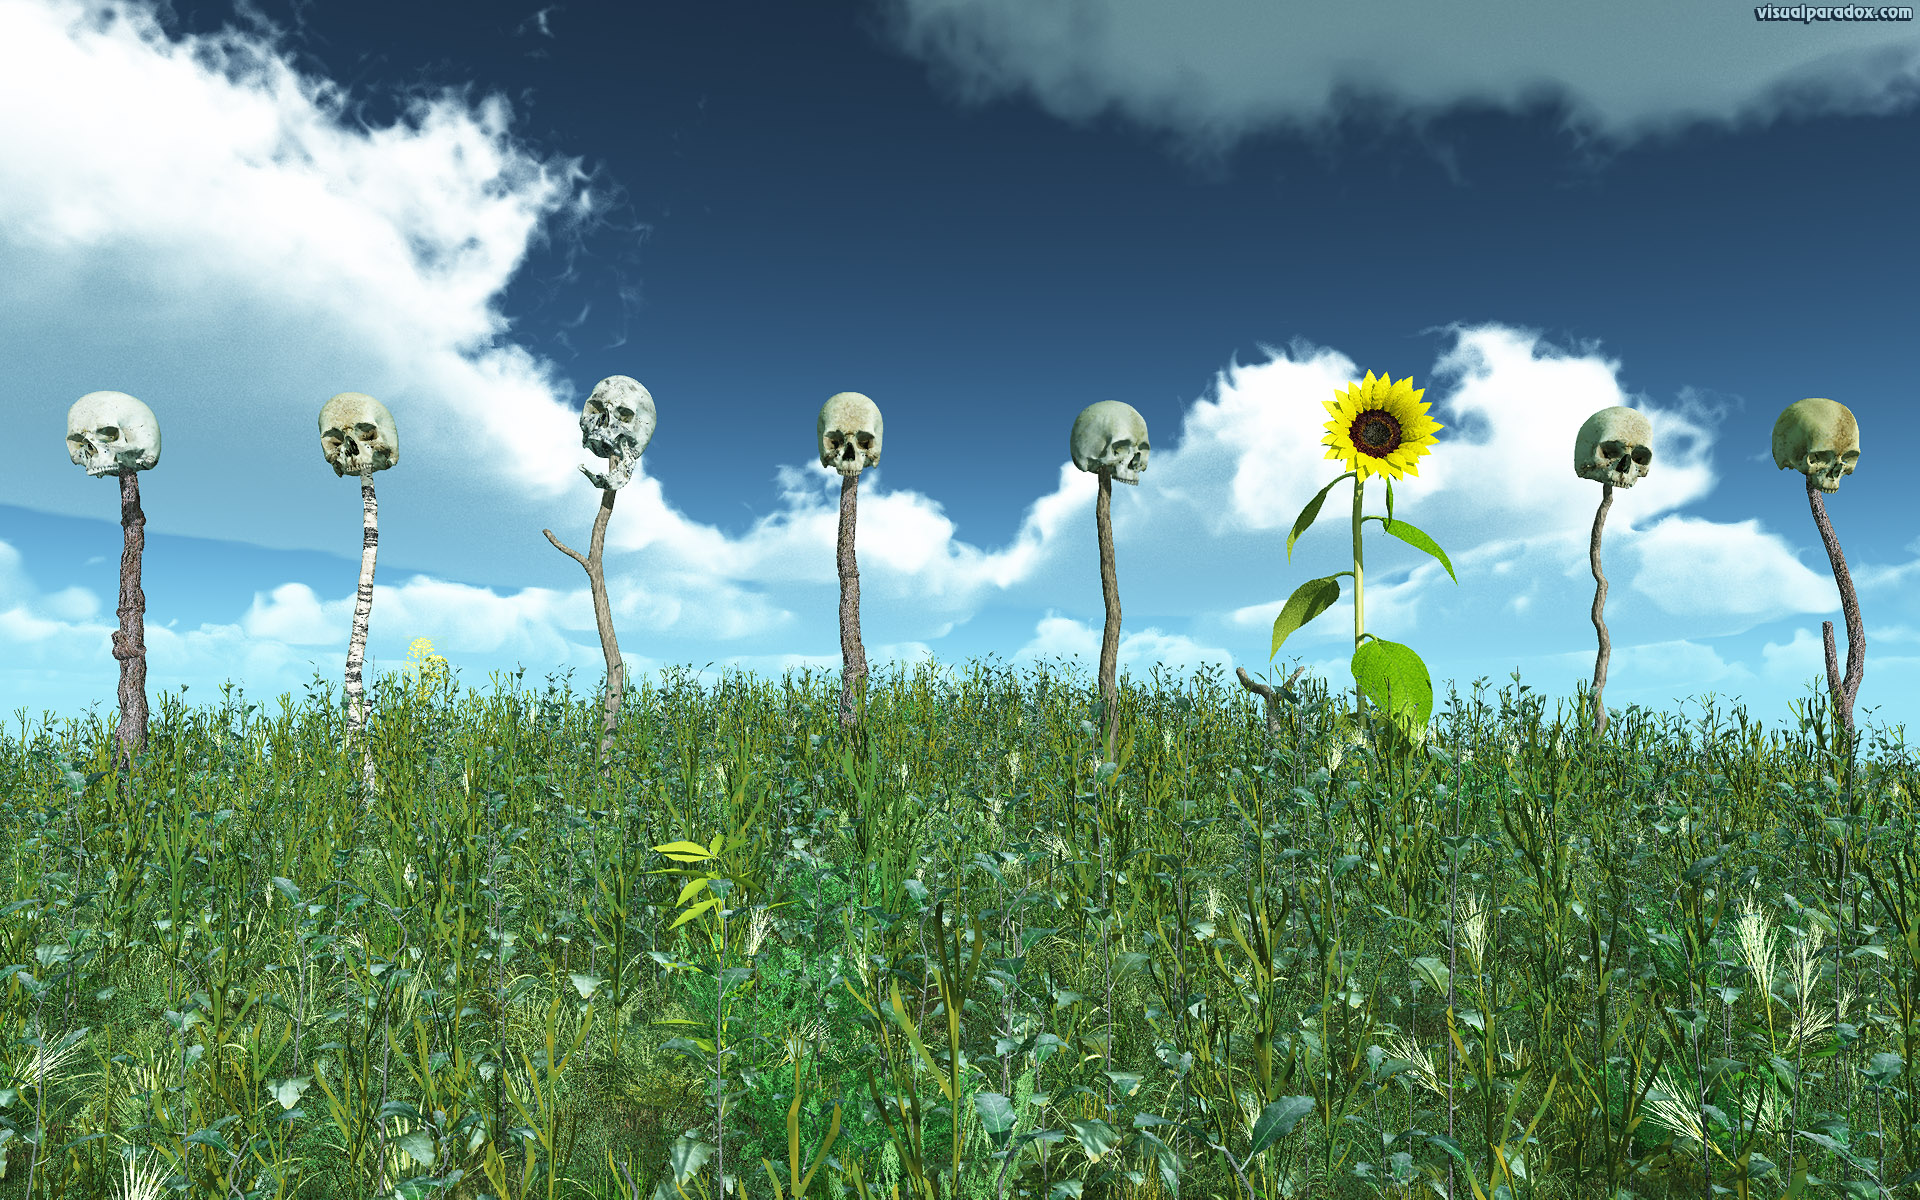 background, beauty, beware, bloom, blooming, blossom, blue, bone, bones, botanical, botany, bright, caution, circle, cloud, color, colorful, dark, eyes, face, fence, field, flora, floral, flower, fright, frightening, garden, gardening, grave, graveyard, green, heads, headstone, hill, leaf, marker, natural, nature, organic, petal, pike, plant, plants, poles, pretty, round, row, scary, skeleton, skulls, sky, spooky, summer, sun, sunflower, sunny, teeth, texture, warning, weeds, white, yellow, 3d, wallpaper